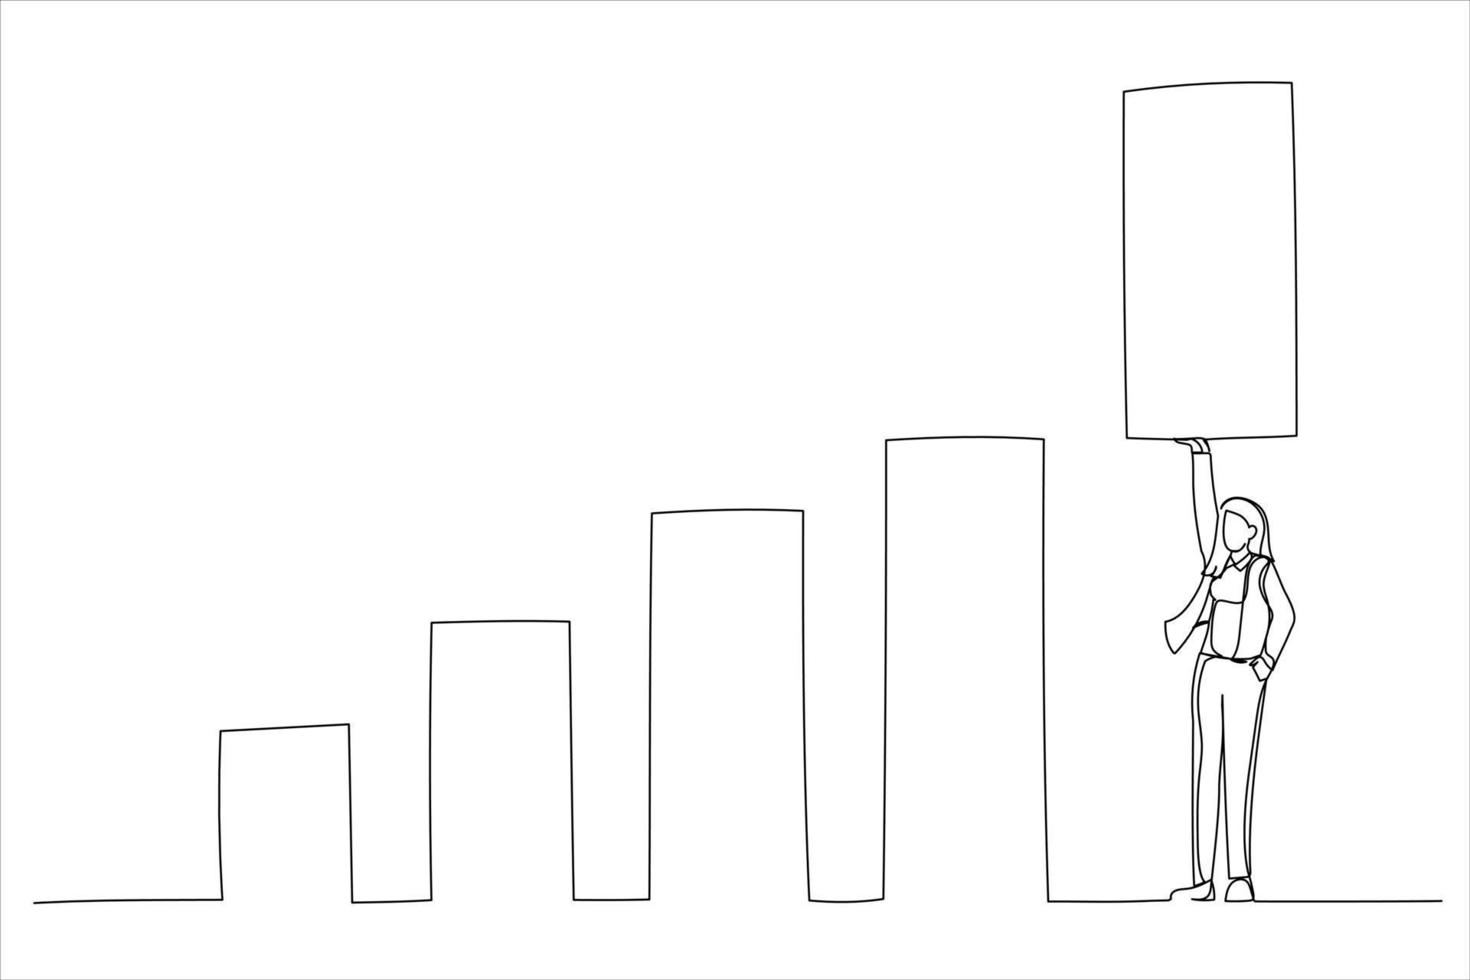 Drawing of confident businesswoman help lift up bar graph to new high level. Increase sales or revenue raising. Single line art style vector